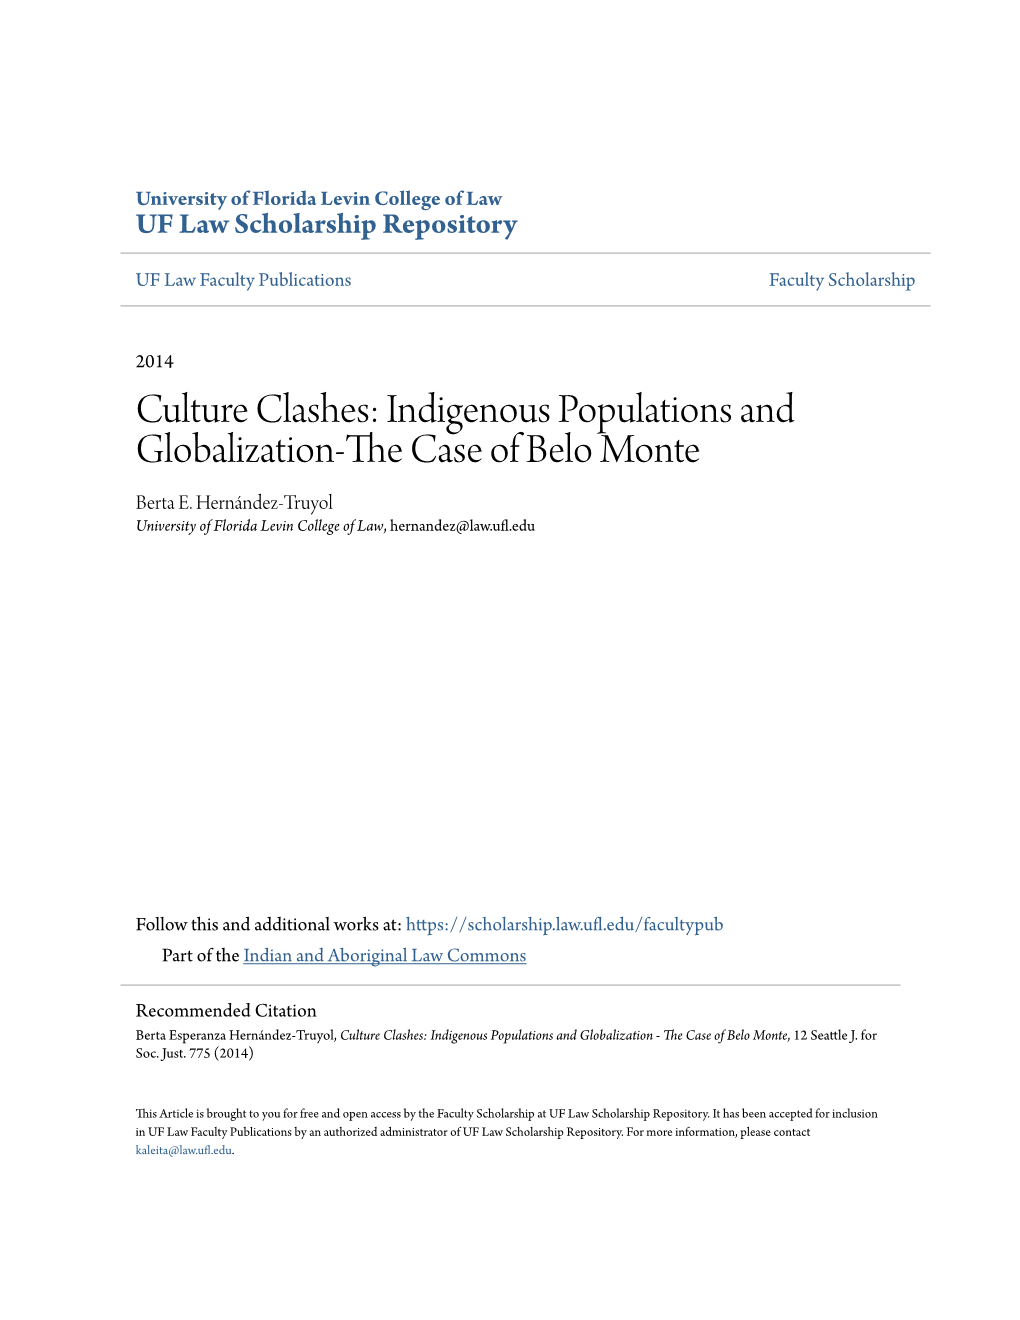 Indigenous Populations and Globalization-The Case of Belo Monte